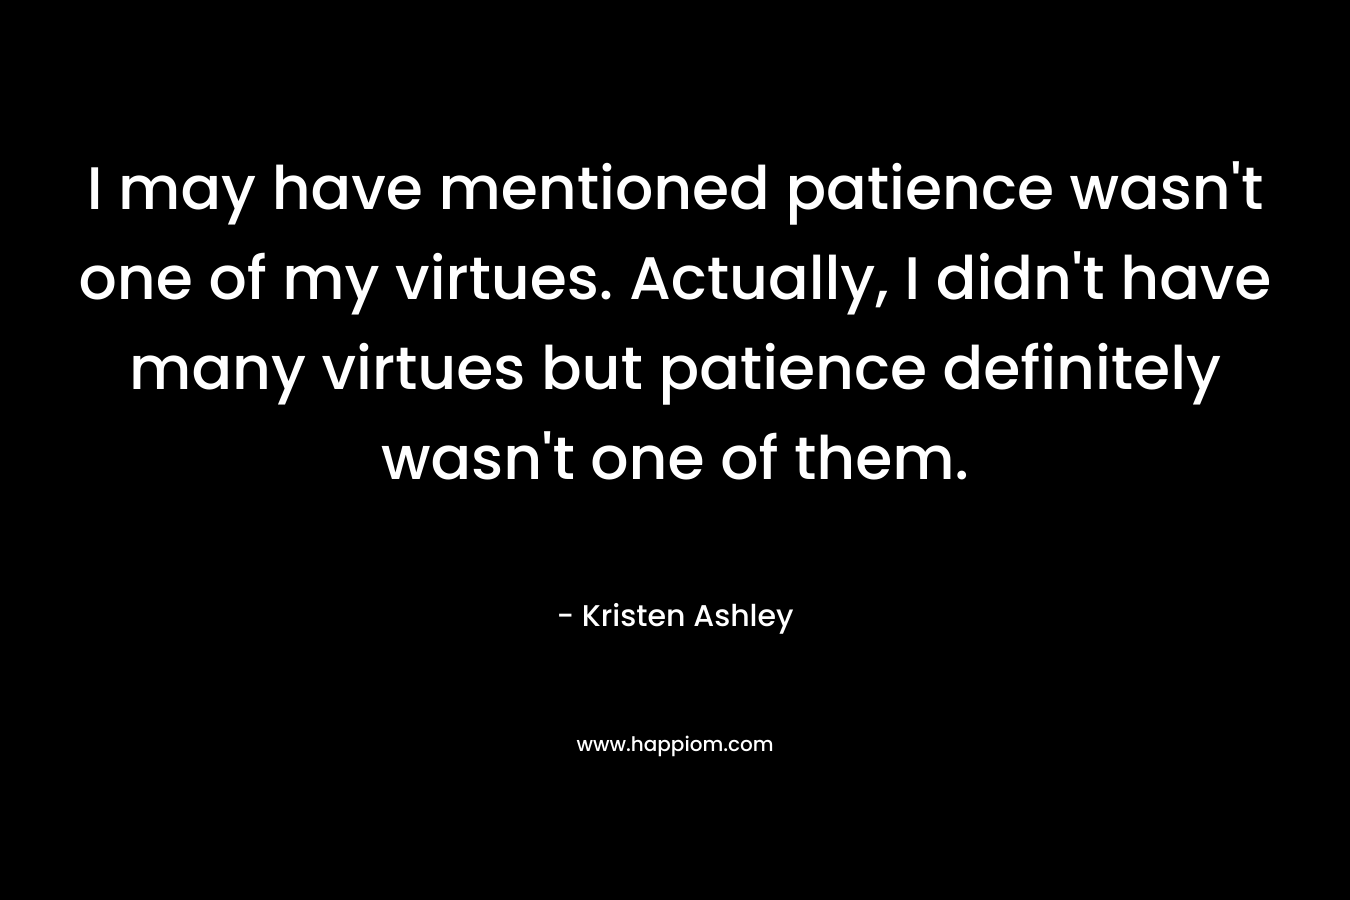 I may have mentioned patience wasn’t one of my virtues. Actually, I didn’t have many virtues but patience definitely wasn’t one of them. – Kristen Ashley